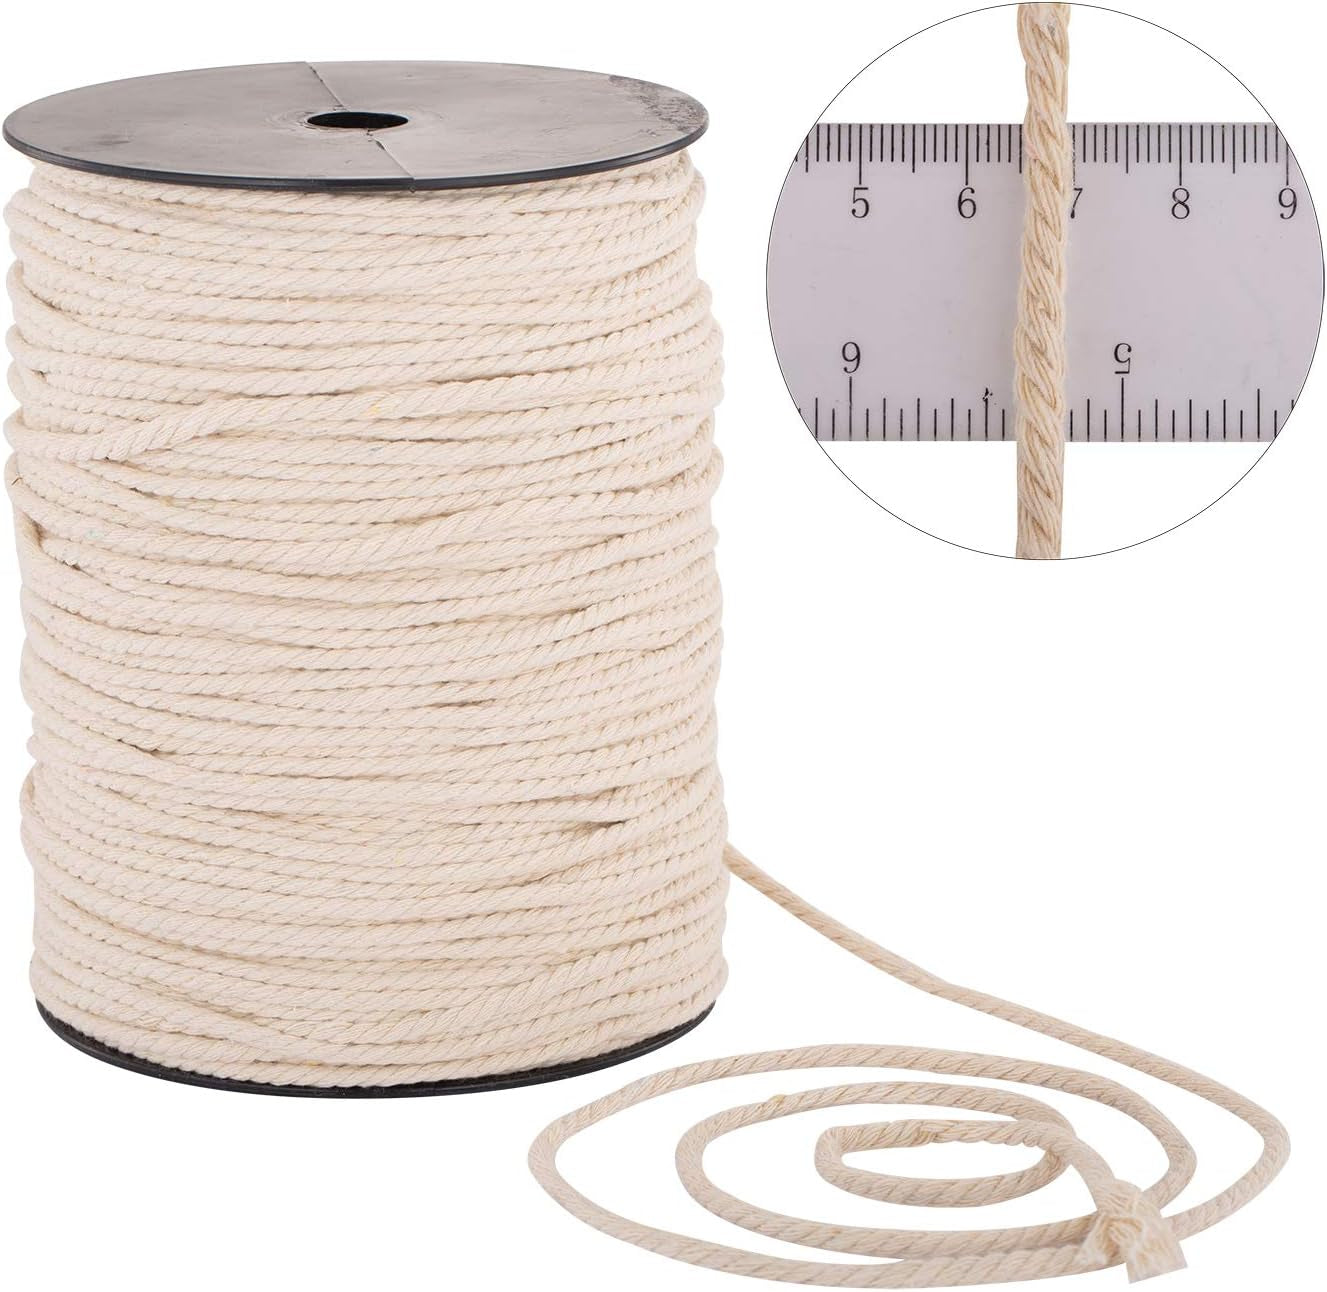 Macrame Cord 4Mm X 240Yd | 100% Natual Cotton Macrame Rope | 3 Strand Twisted Cotton Cord for Handmade Plant Hanger Wall Hanging Craft Making